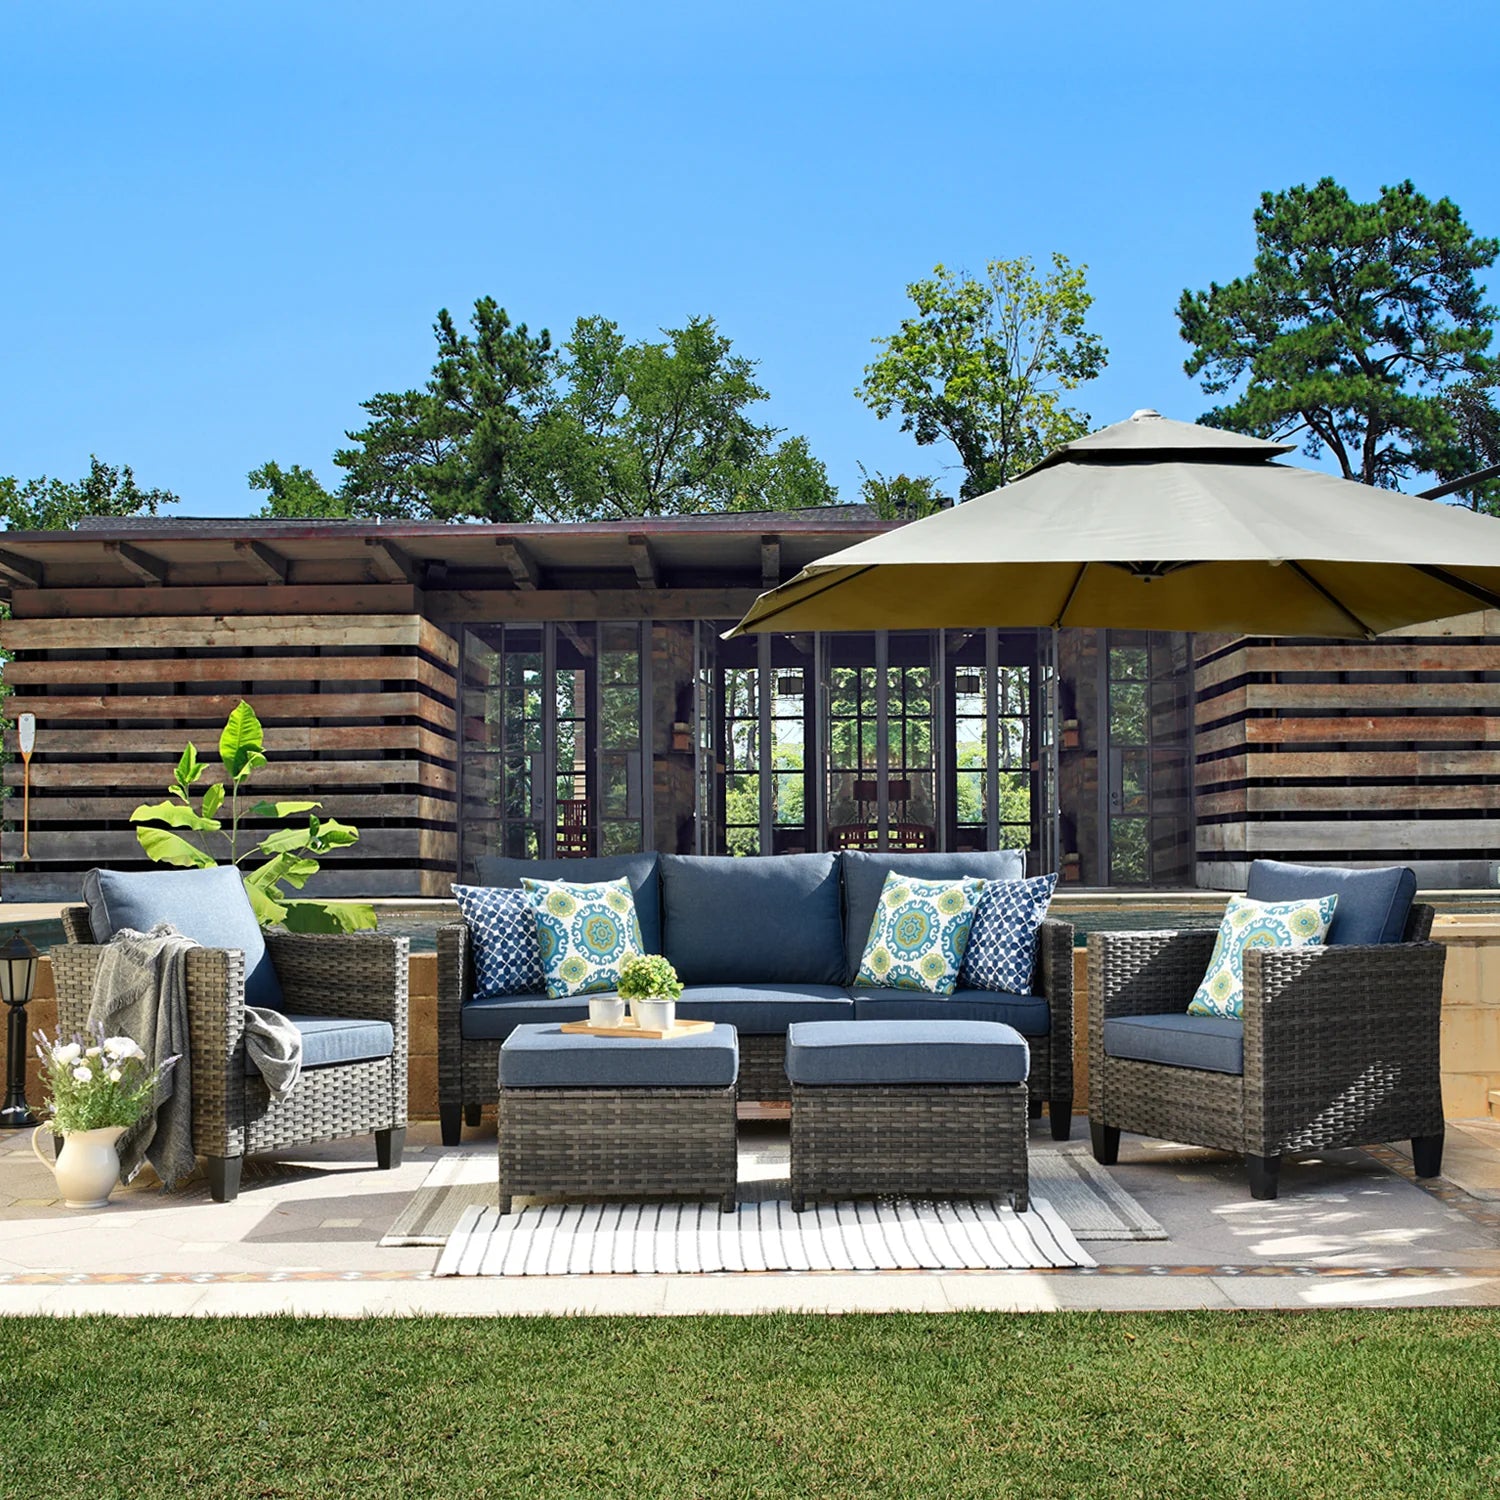 Designing the Perfect Outdoor Wedding Furniture Layout for Comfort and Style